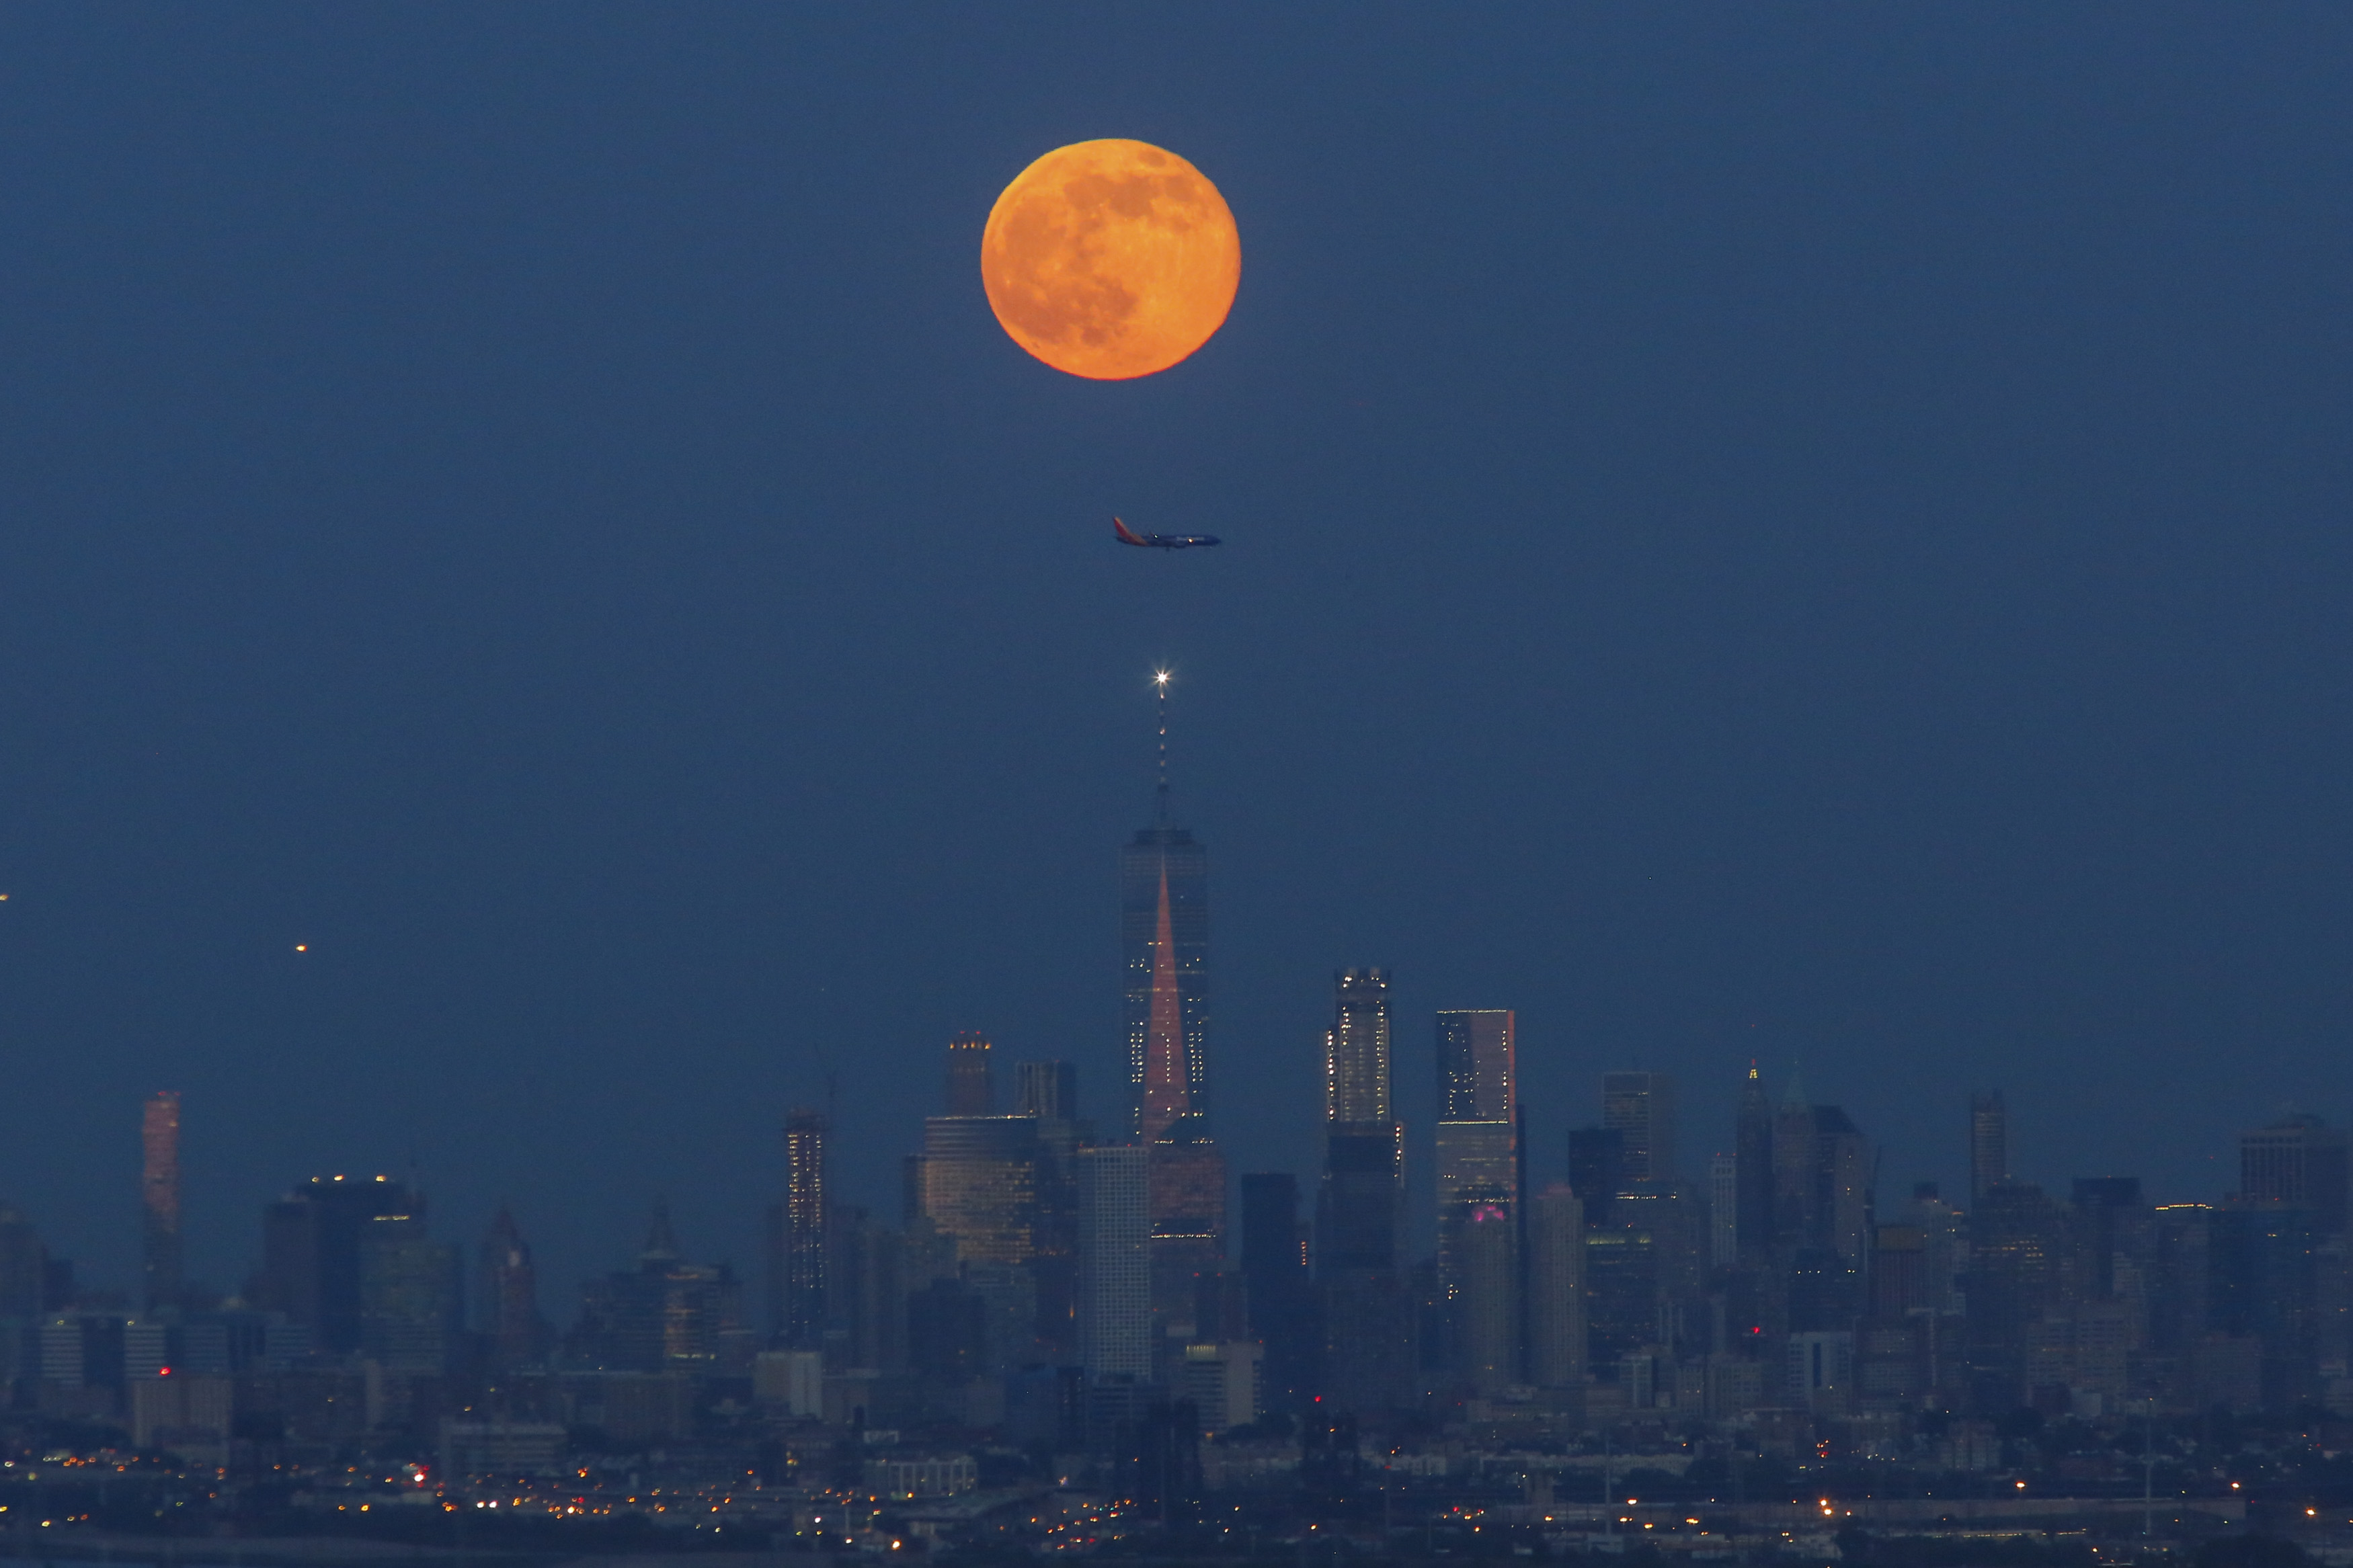 The Strawberry Moon rises over lower Manhattan and One World Trade Center on June 06, 2017 in Montclair, New Jersey. (Photo by Kena Betancur/VIEWpress/Corbis via Getty Images) (VIEW press—Corbis via Getty Images)